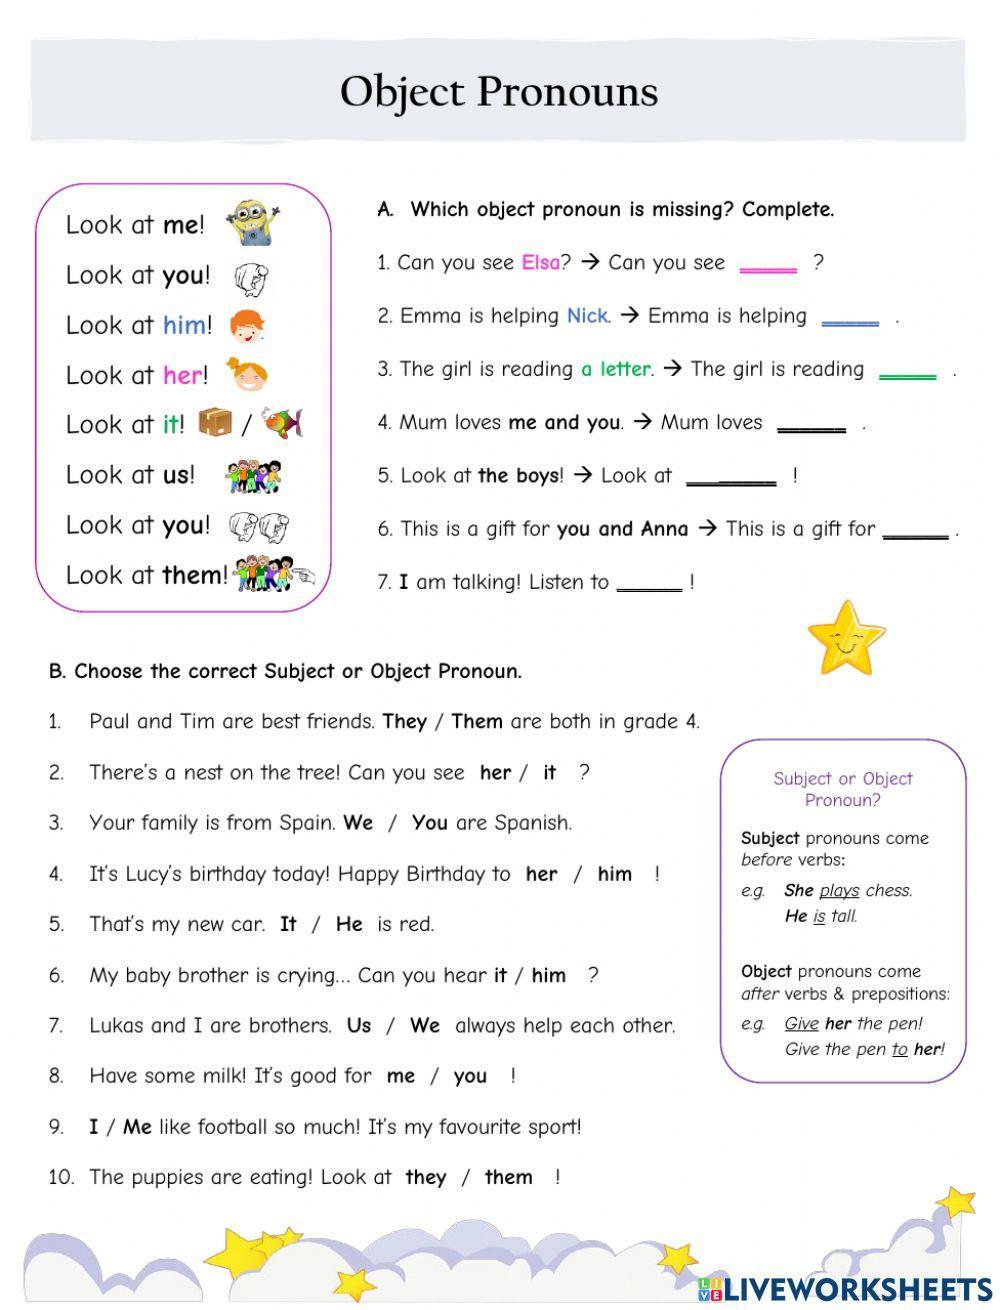 object-pronouns-for-beginners-worksheet-live-worksheets